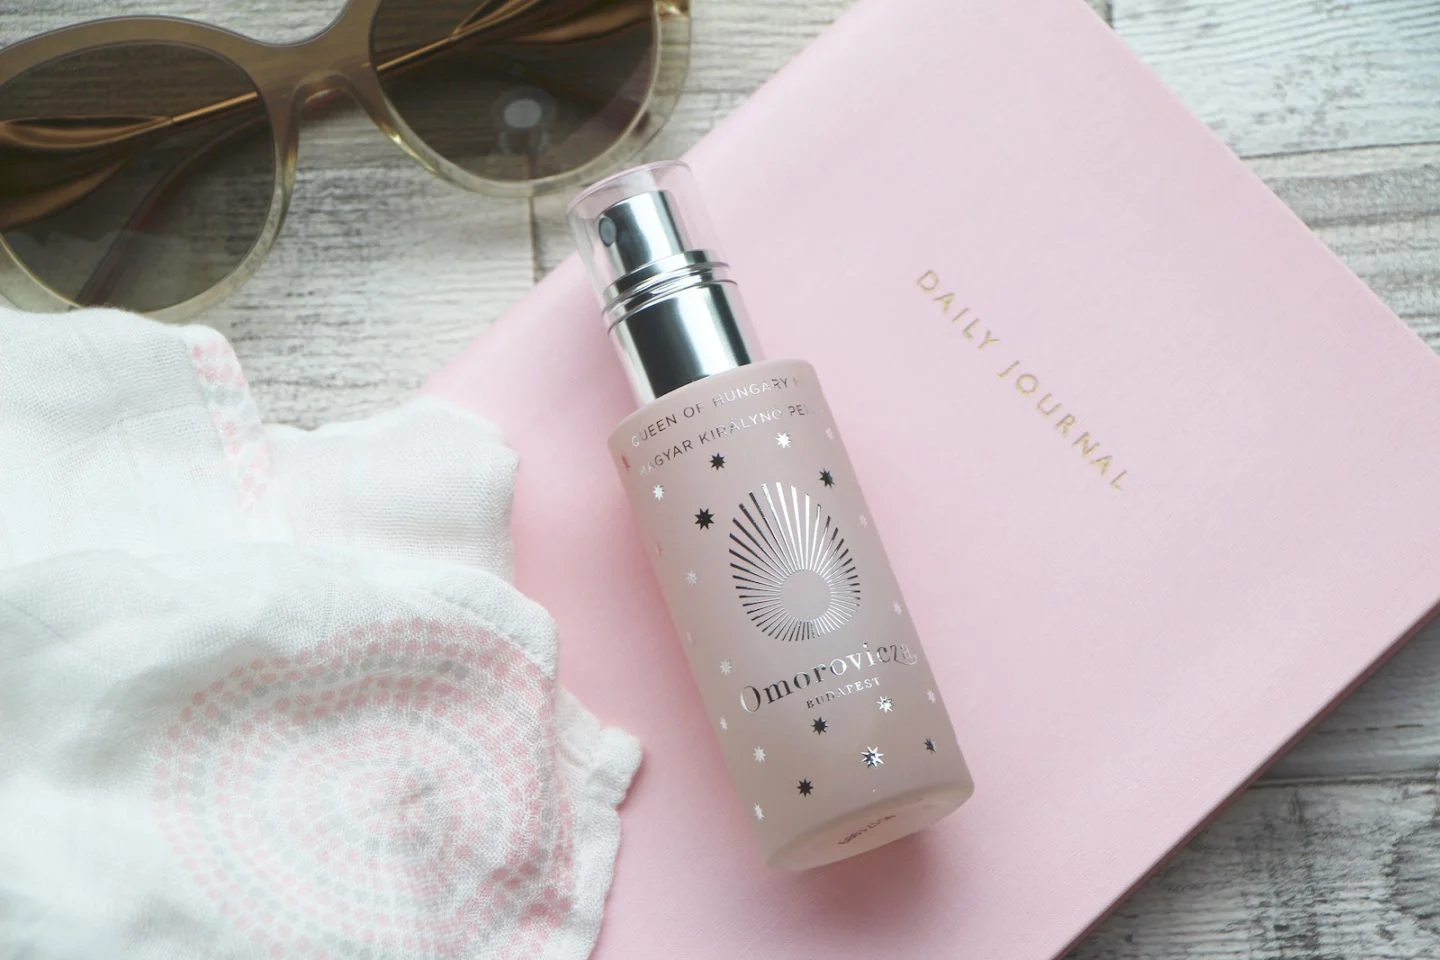 Omorovicza Limited Edition Queen of Hungary Mist review